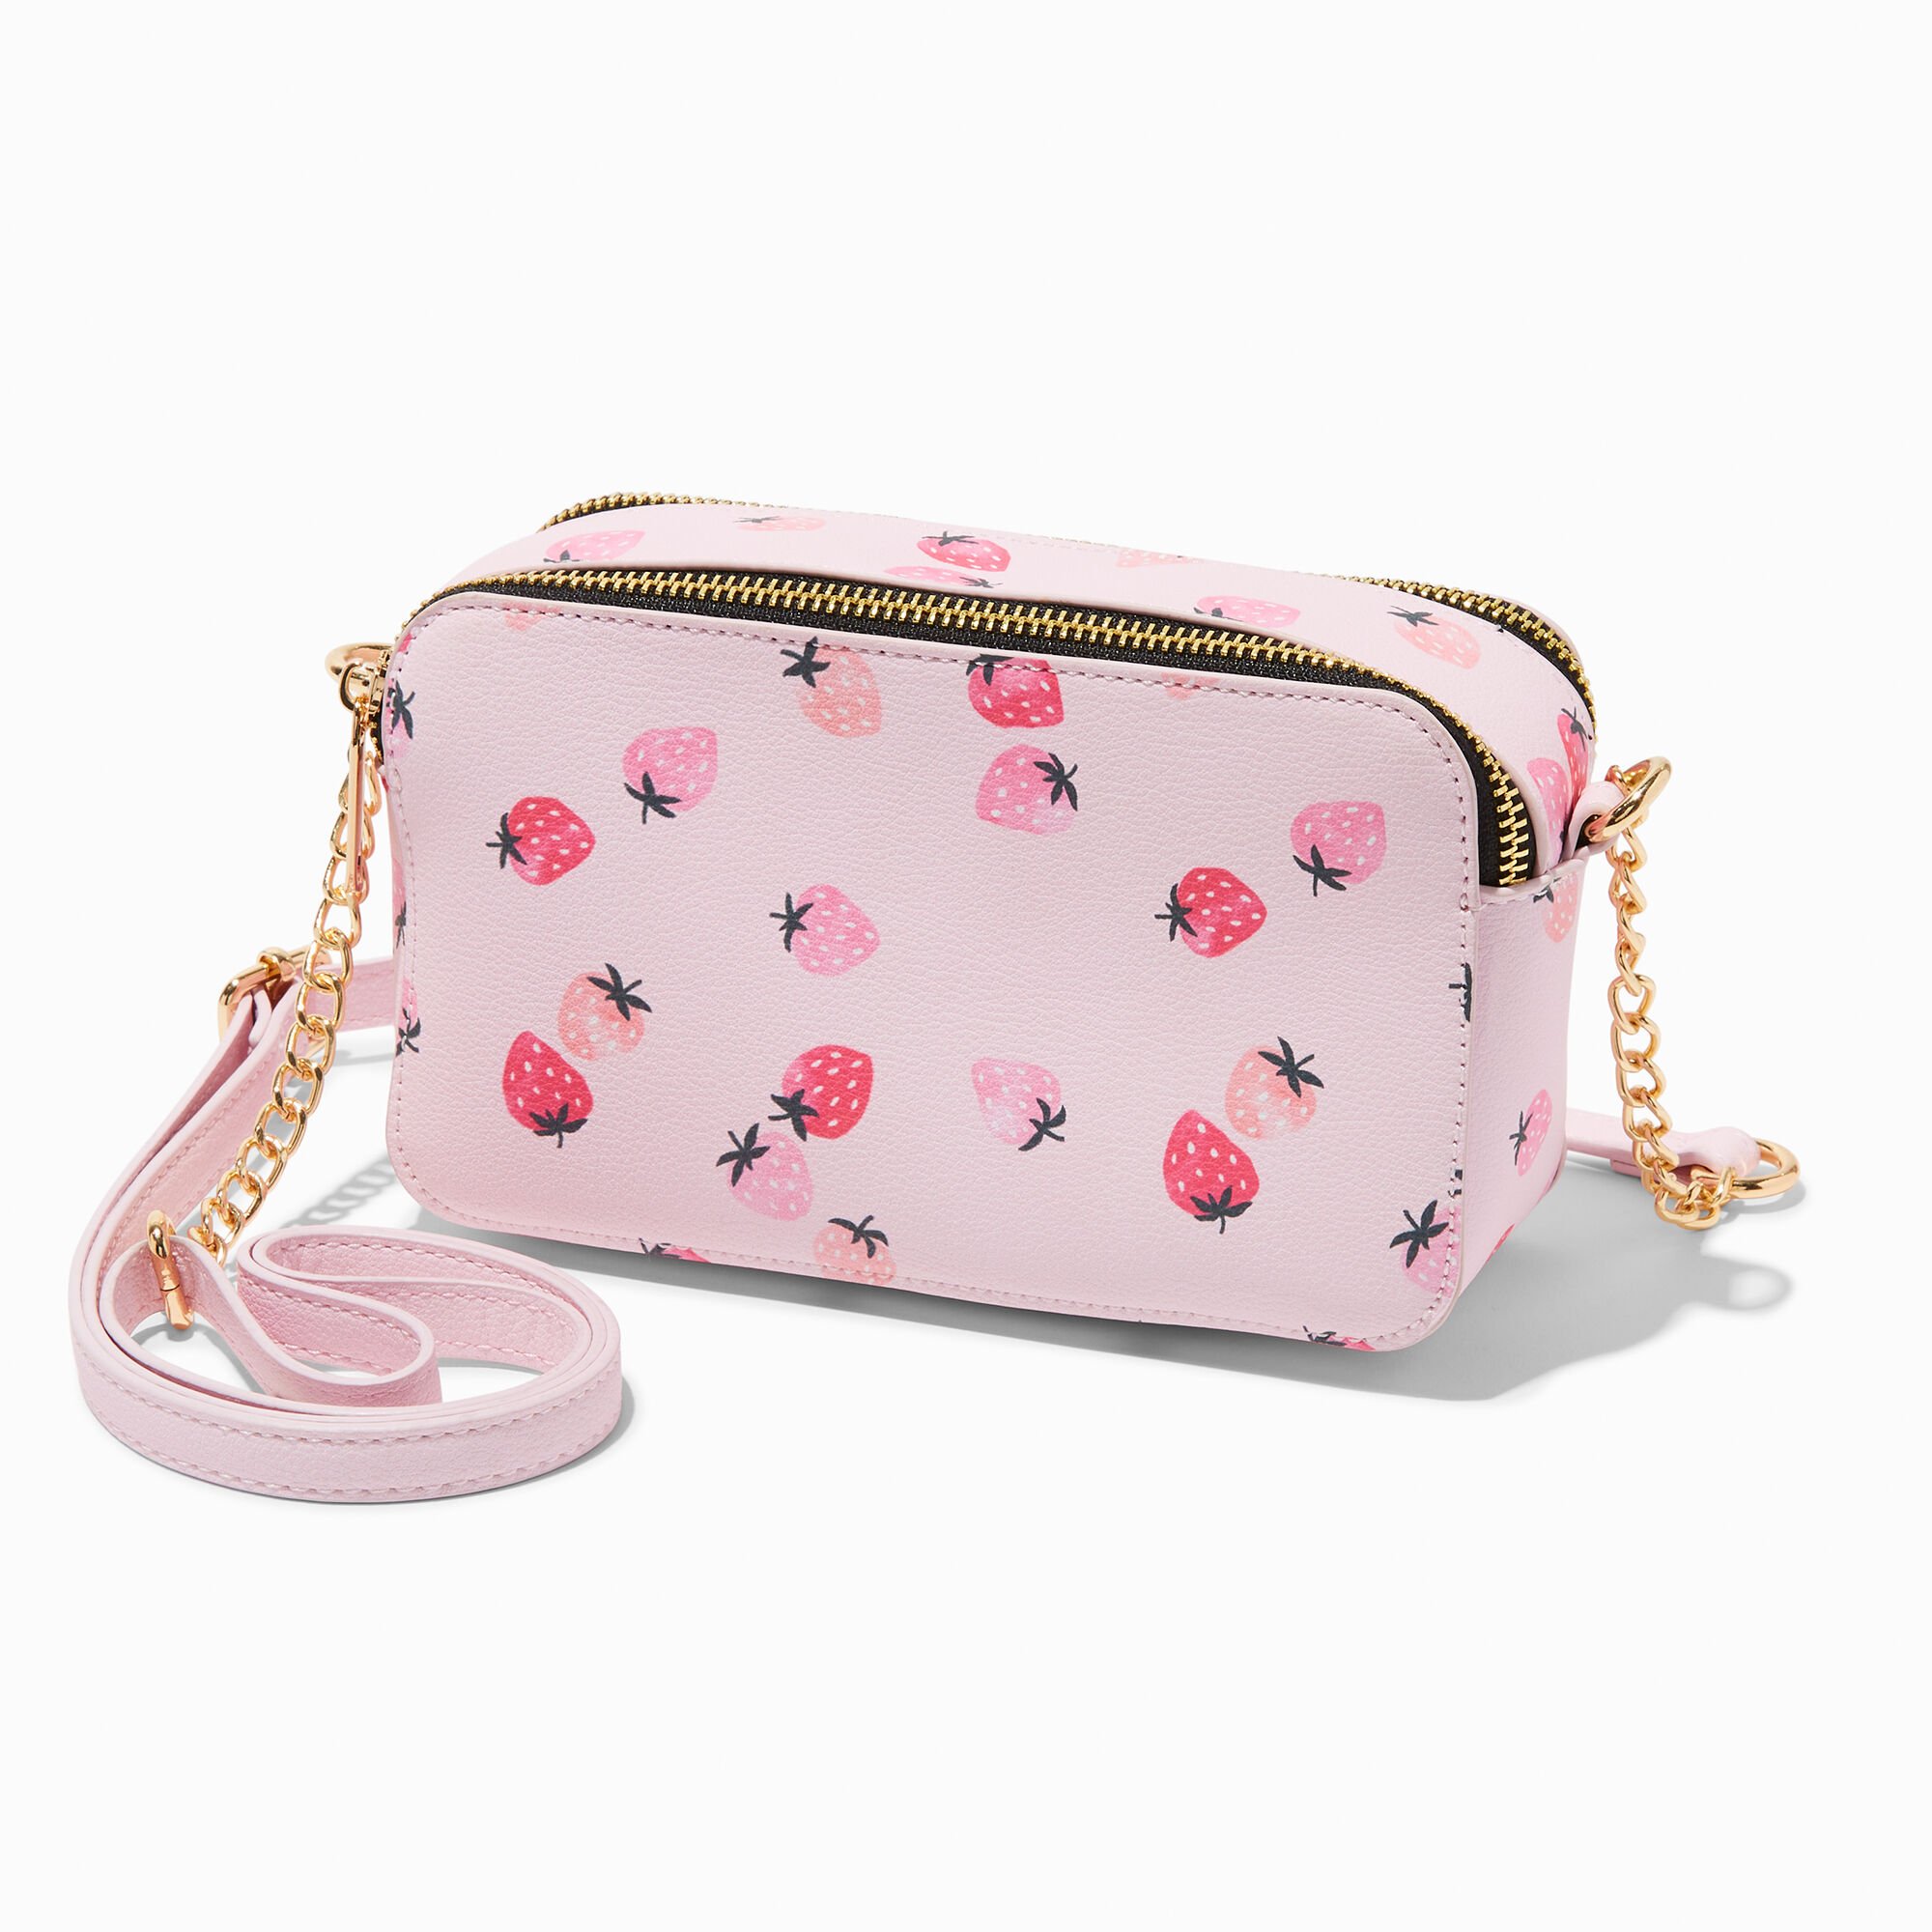 View Claires Strawberry Print Camera Crossbody Bag Pink information